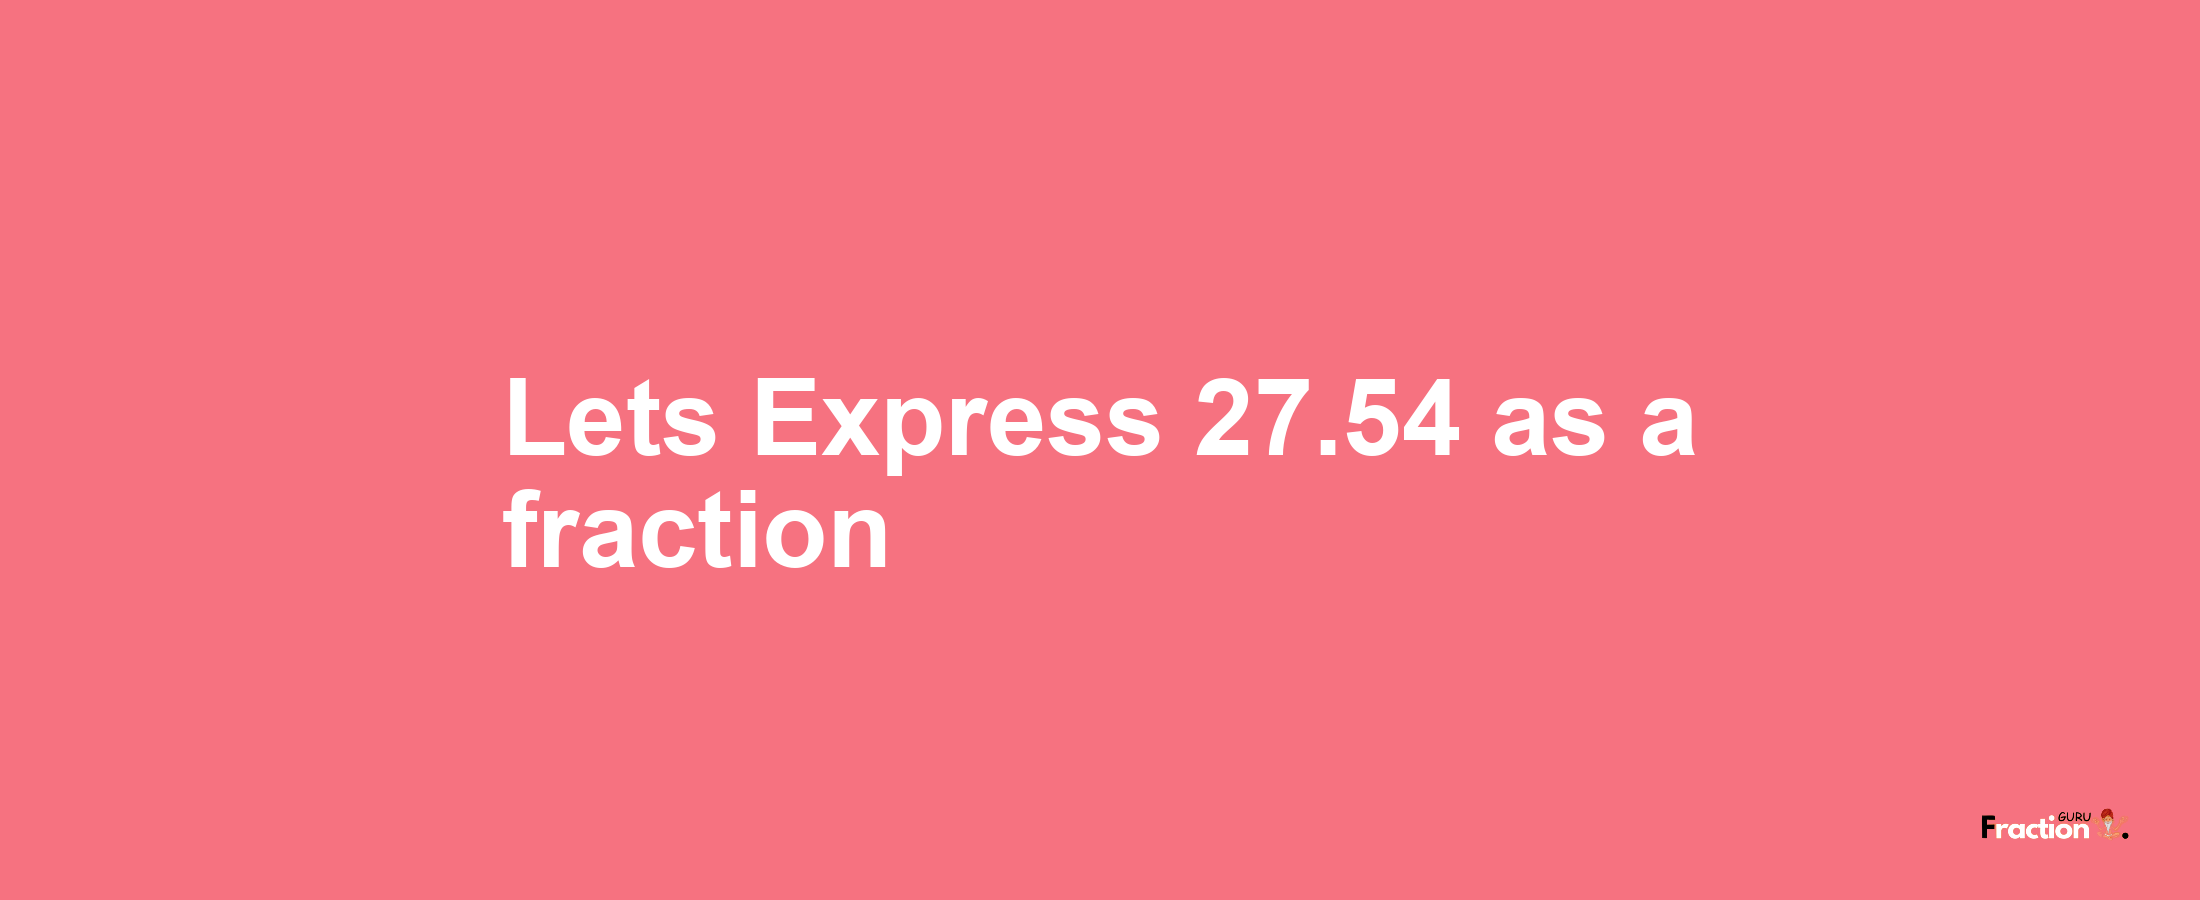 Lets Express 27.54 as afraction